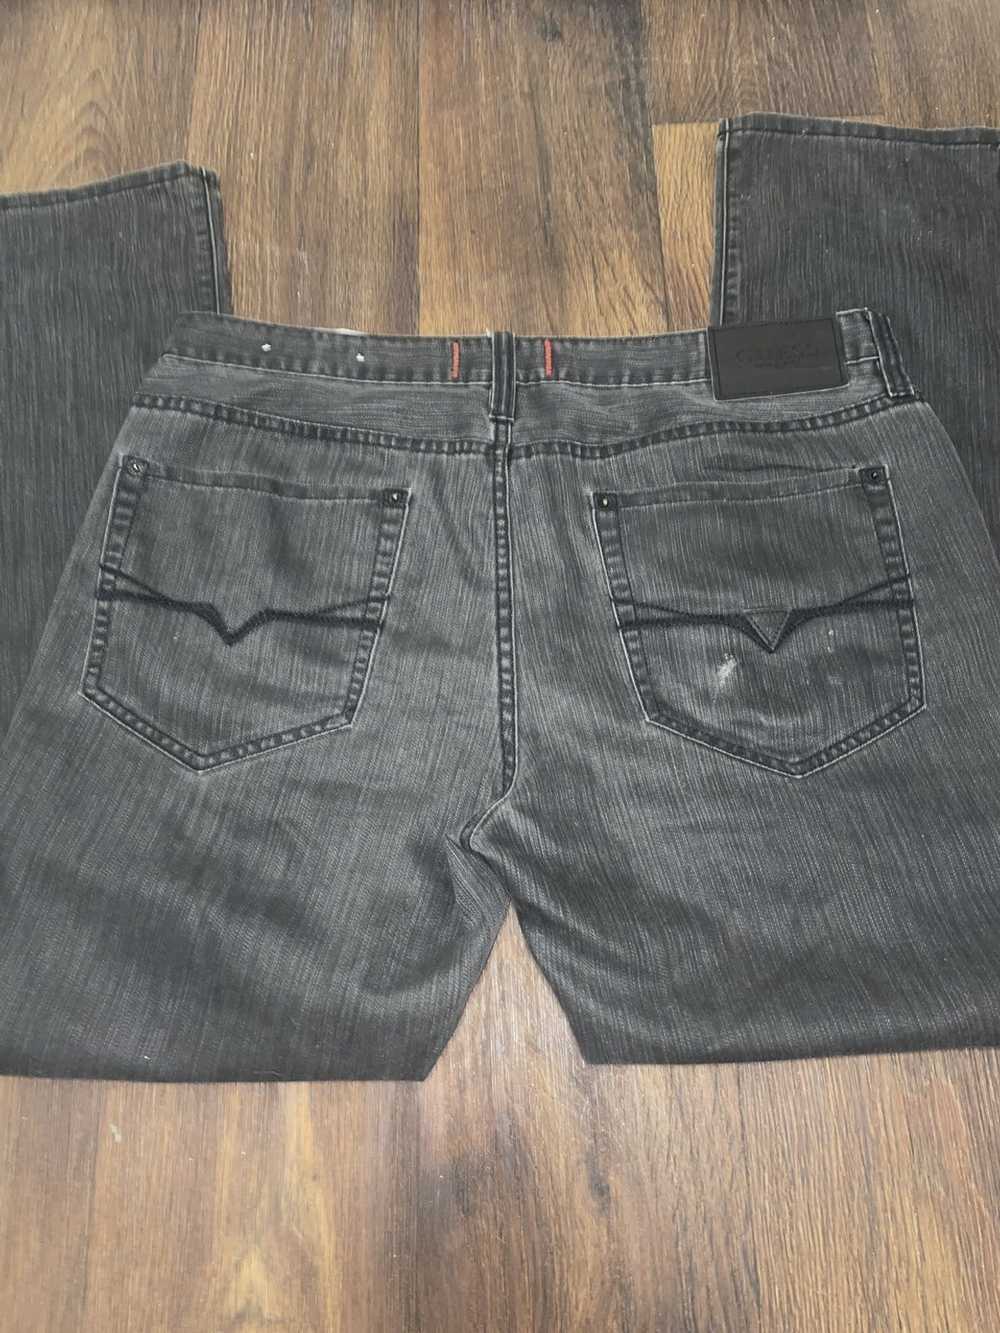 Guess Vintage GUESS jeans - image 6